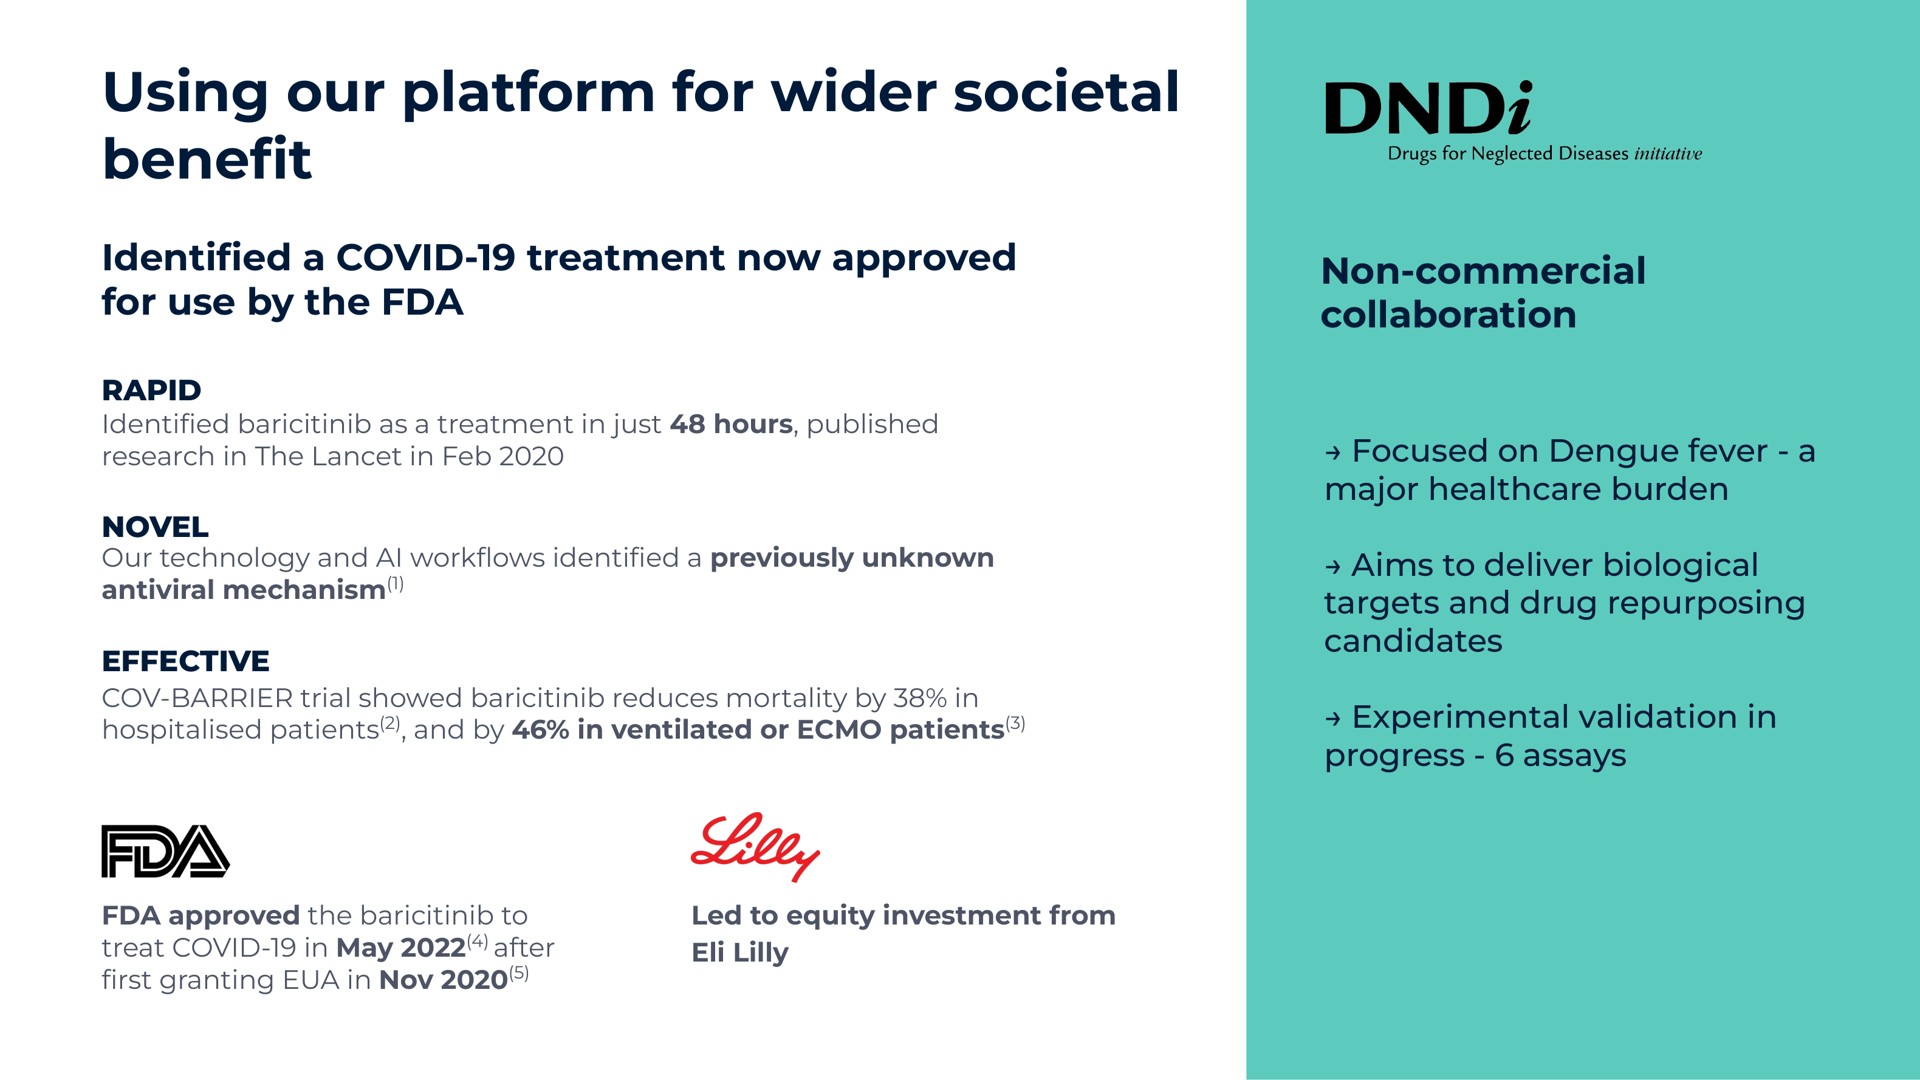 using our platform for societal bene a covid treatment now approved for use by the non commercial collaboration rapid novel effective focused on dengue fever a major burden aims to deliver biological targets and drug candidates experimental validation in progress assays benefit lilt | BenevolentAI